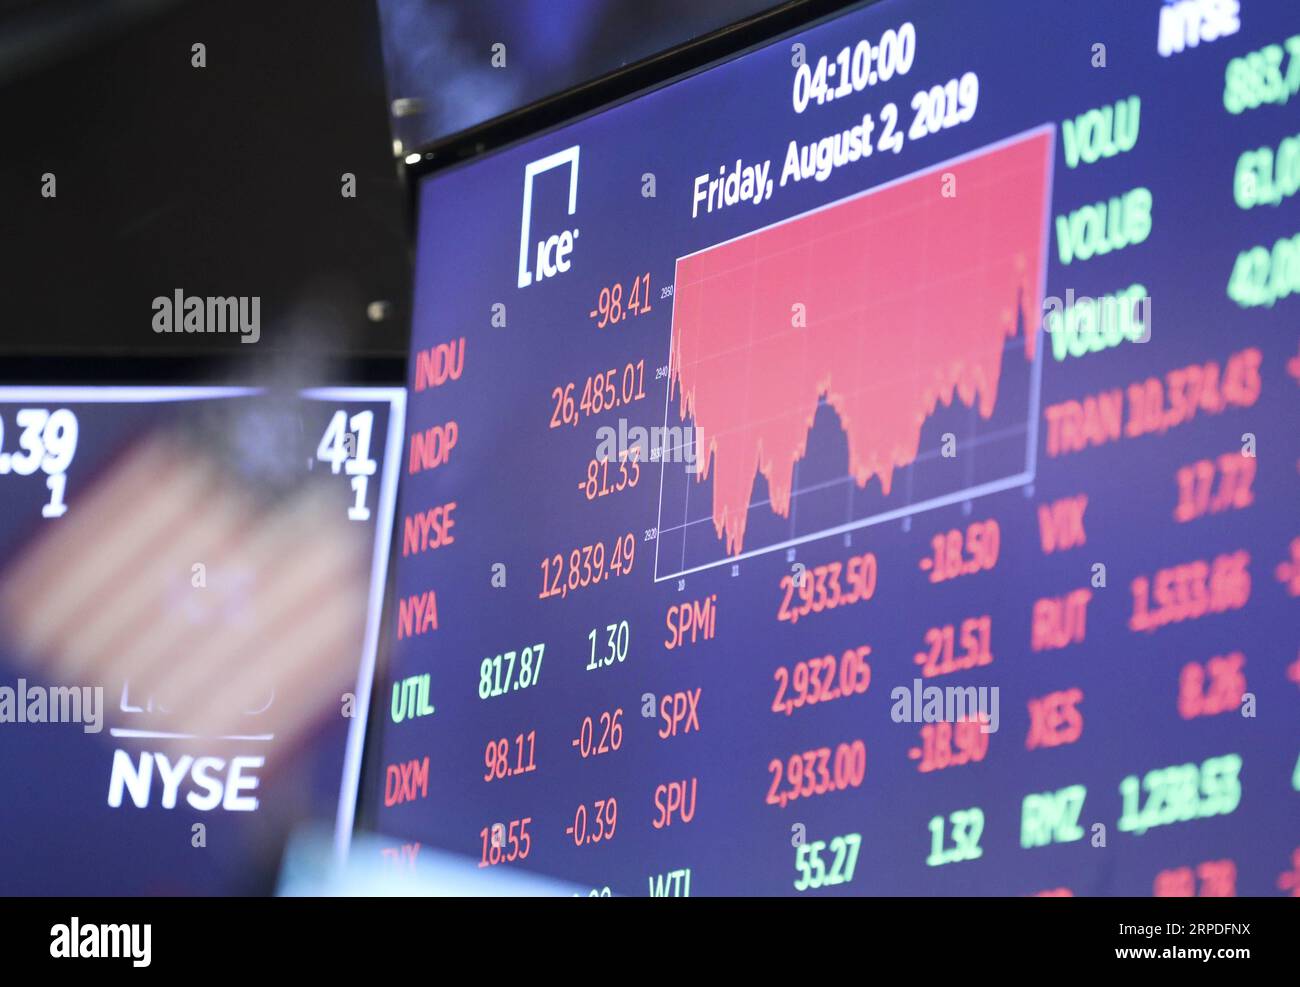 New York, Handelstag an der Wall Street (190802) -- NEW YORK, Aug. 2, 2019 -- Trading chart is seen on an electronic screen at the New York Stock Exchange in New York, the United States, Aug. 2, 2019. U.S. stocks ended lower on Friday, as investors digested a batch of economic data and a Fed official expressed dissent over the central bank s rate cut move. The Dow Jones Industrial Average decreased 98.41 points, or 0.37 percent, to 26,485.01. The S&P 500 fell 21.51 points, or 0.73 percent, to 2,932.05. The Nasdaq Composite Index shed 107.05 points, or 1.32 percent, to 8,004.07. ) U.S.-NEW YORK Stock Photo